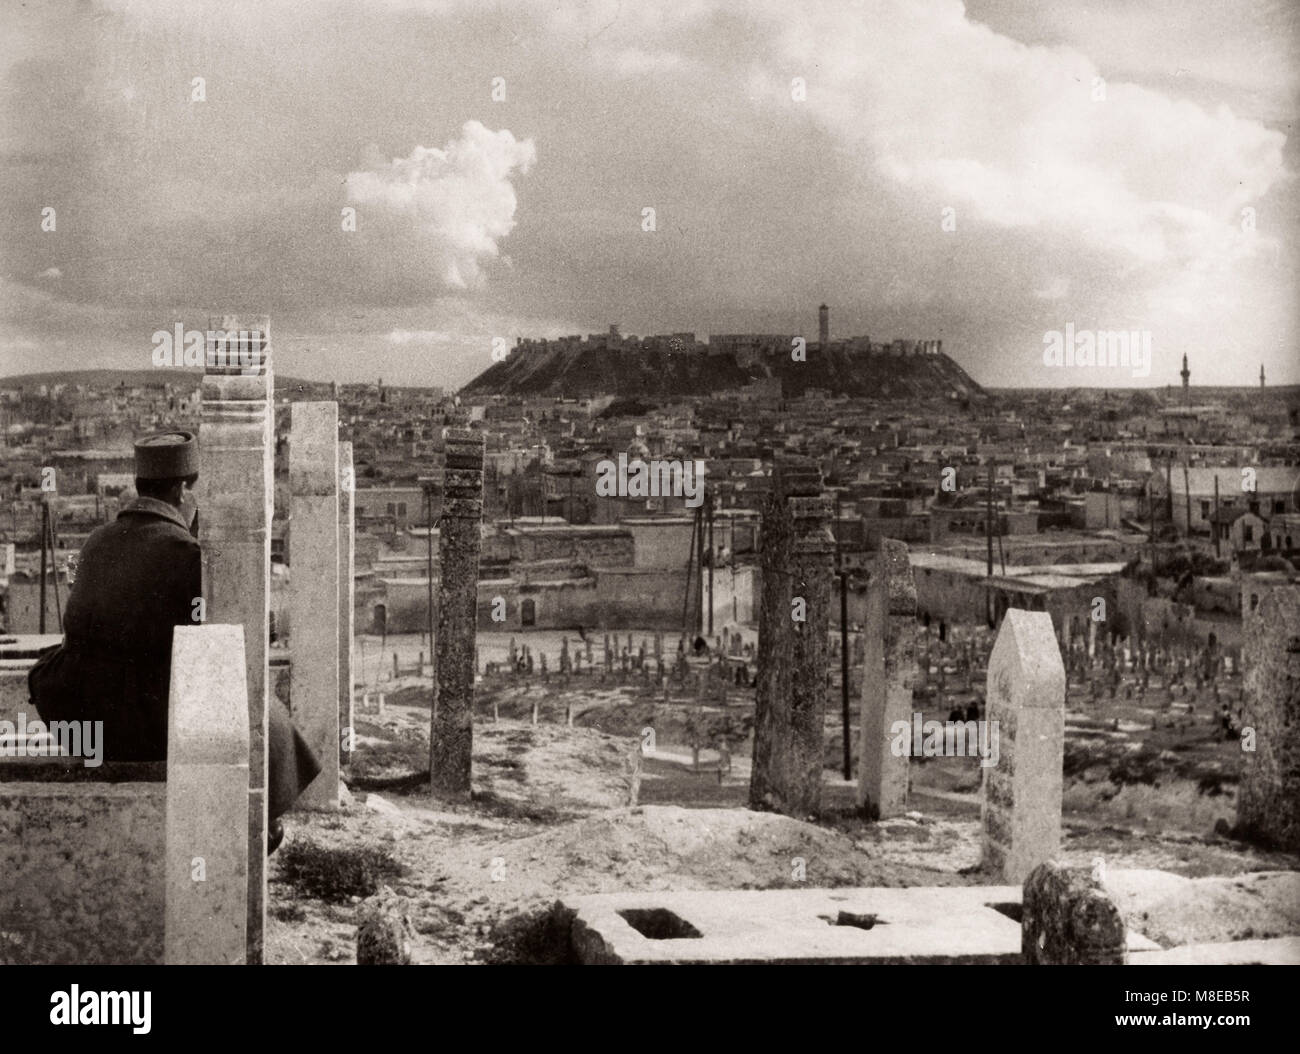 1943 Middle East Syria - scene at Aleppo view of the city Stock Photo